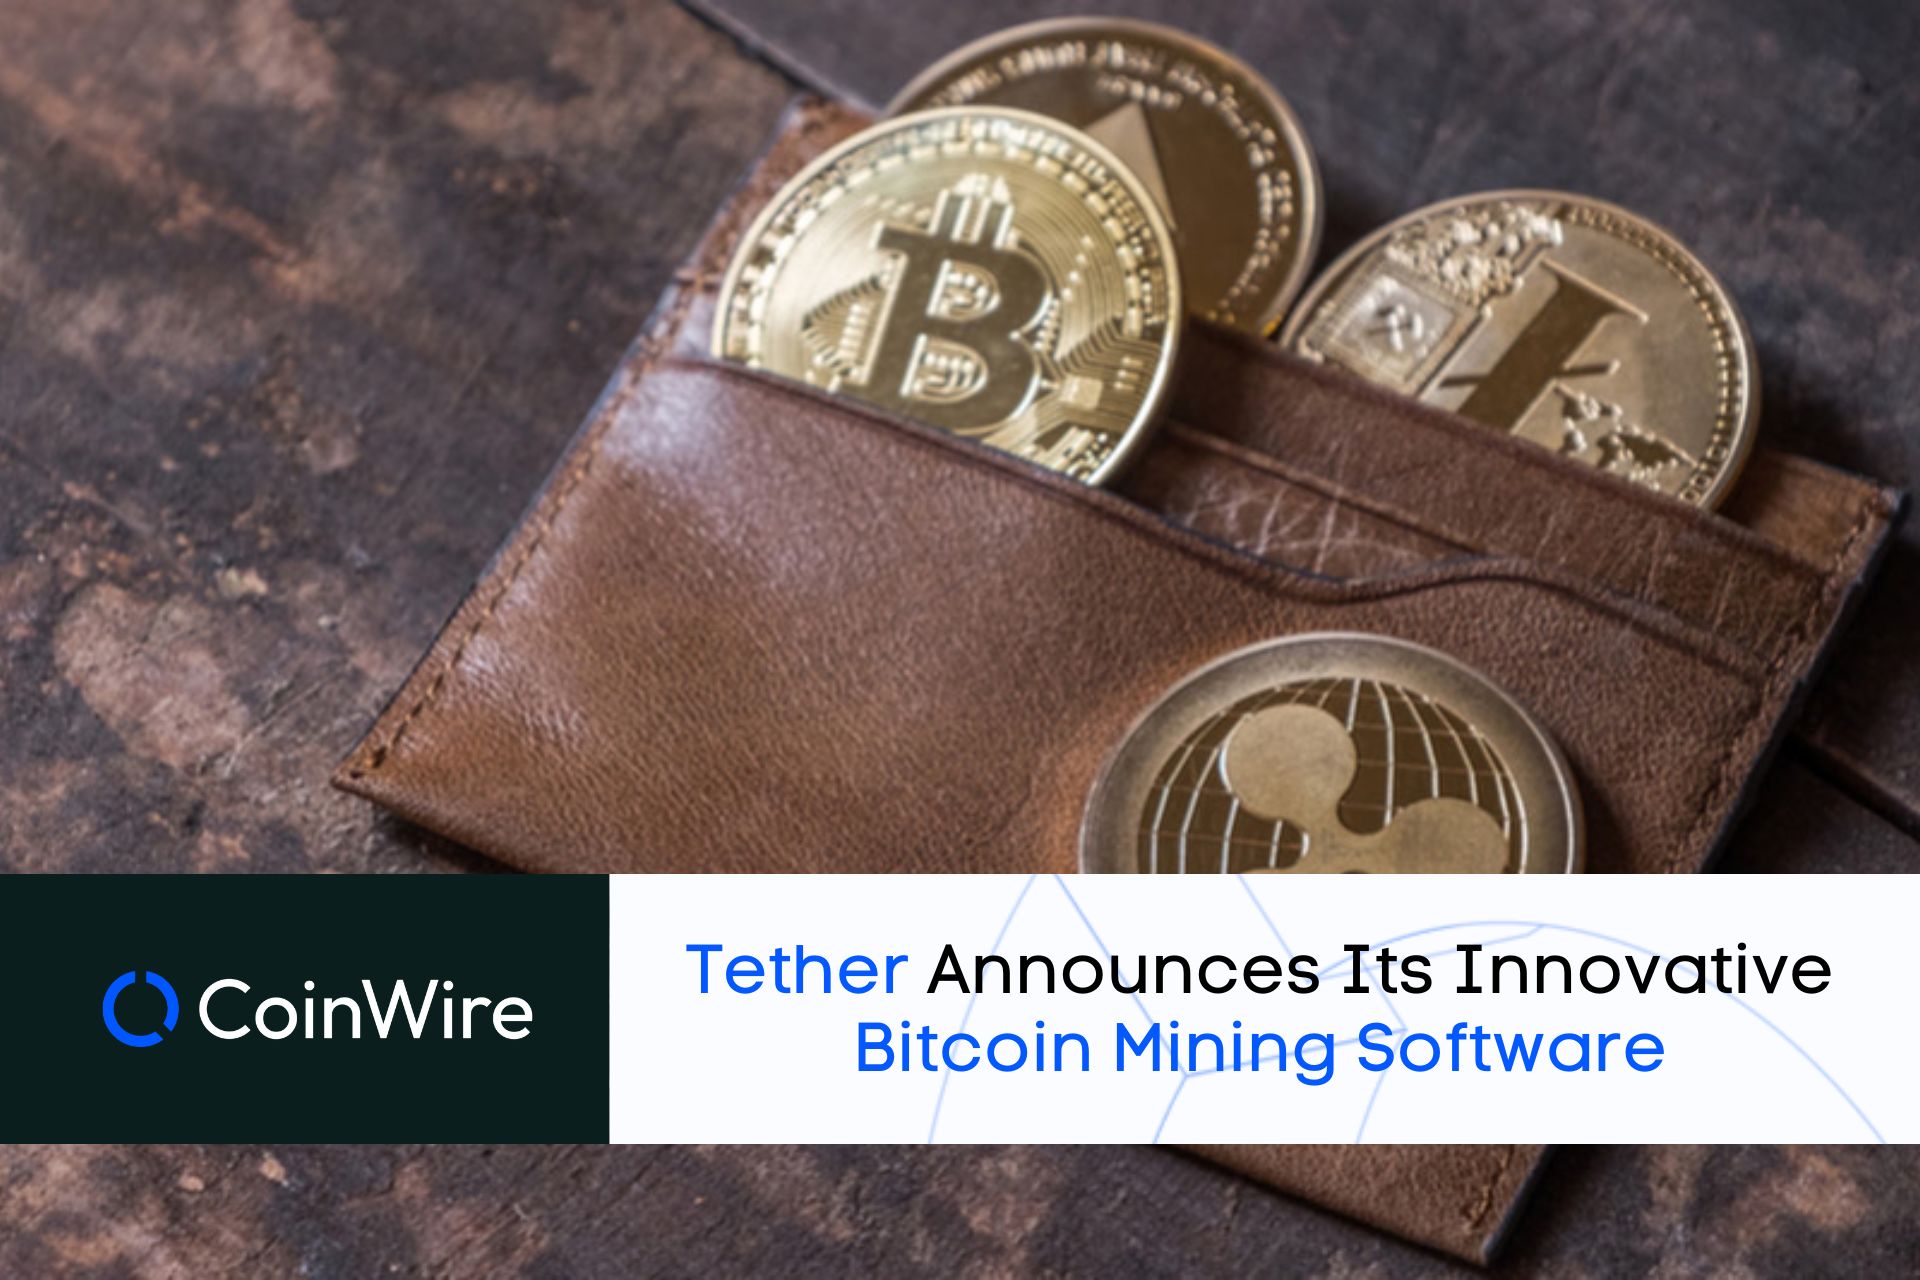 Tether Announces Its Innovative Bitcoin Mining Software